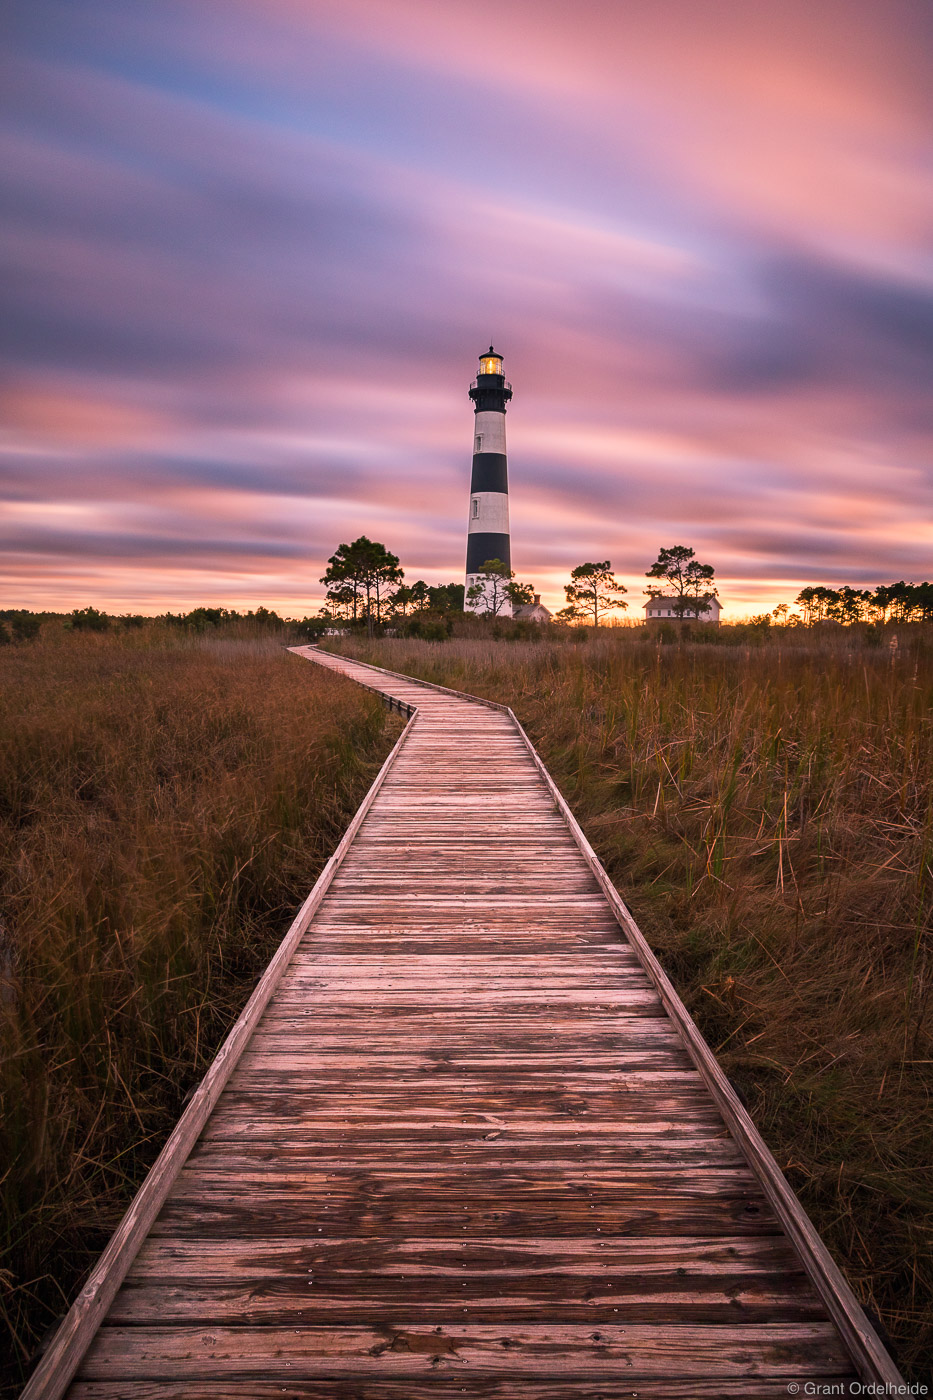 A stormy sunset over the historic Bodie Island Lighthouse on North Carolina's Outer Banks.